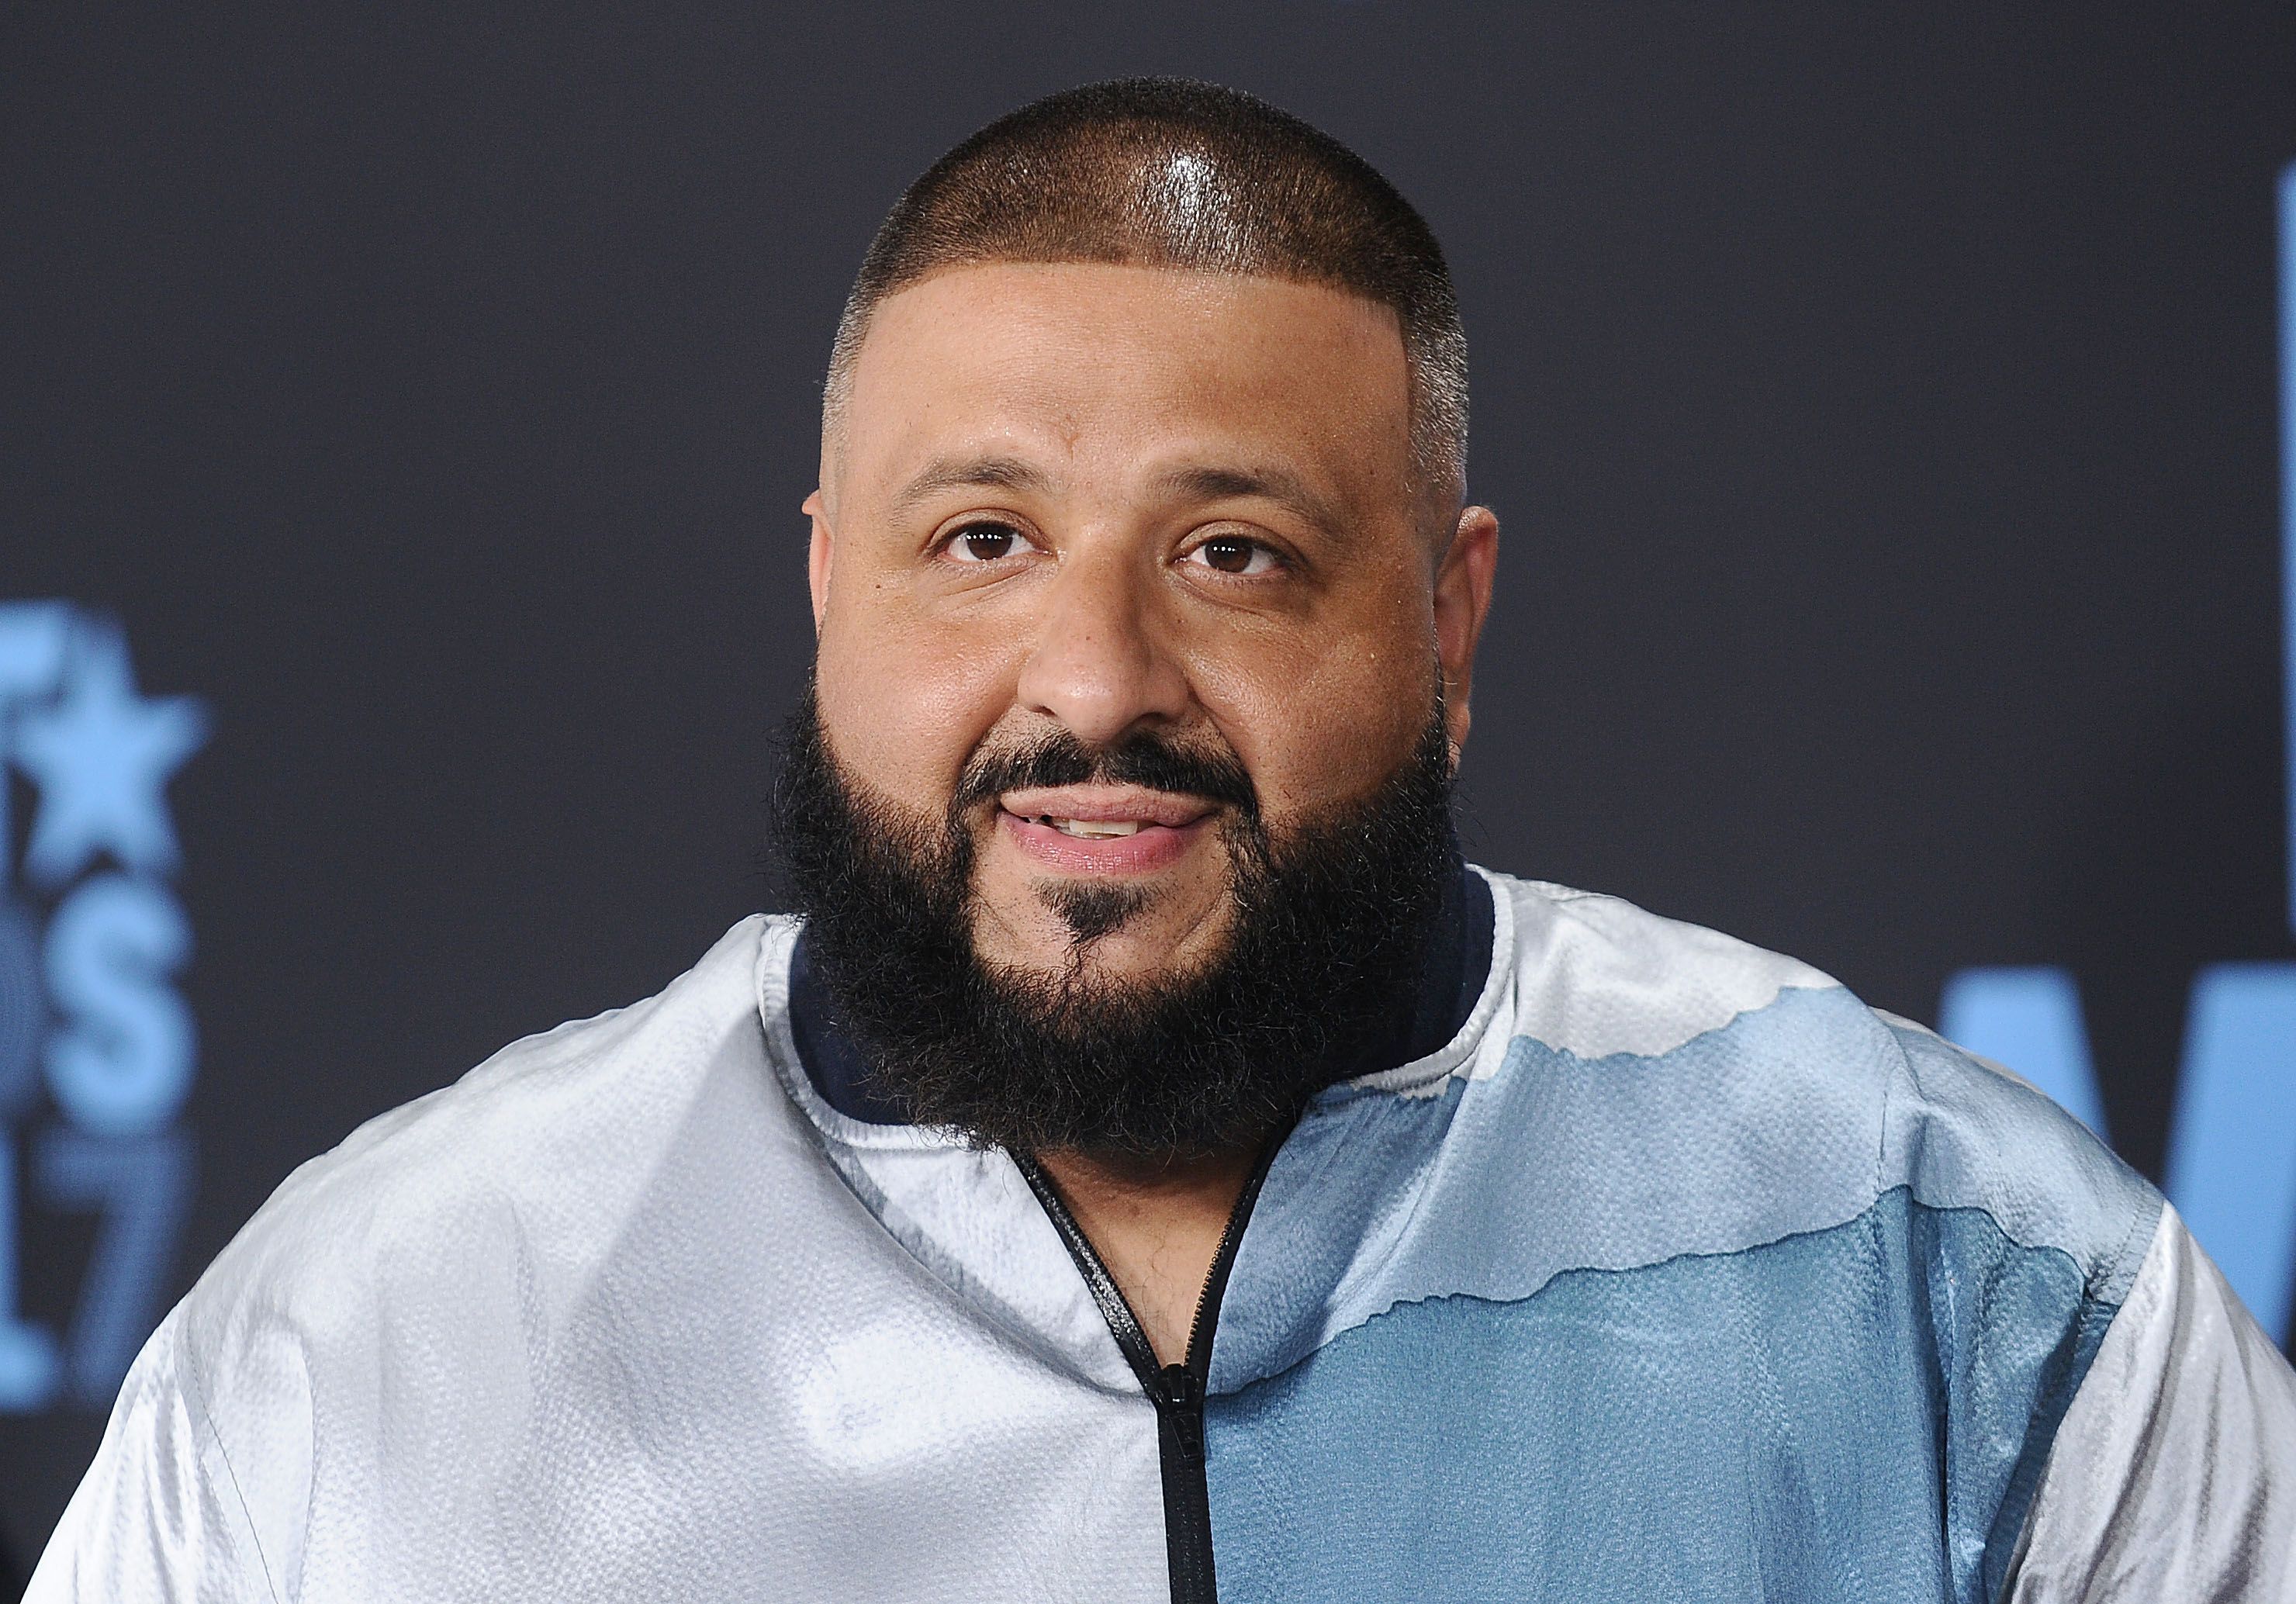 DJ Khaled attending the BET Awards on June 25, 2017 in Los Angeles. | Photo: Getty Images 